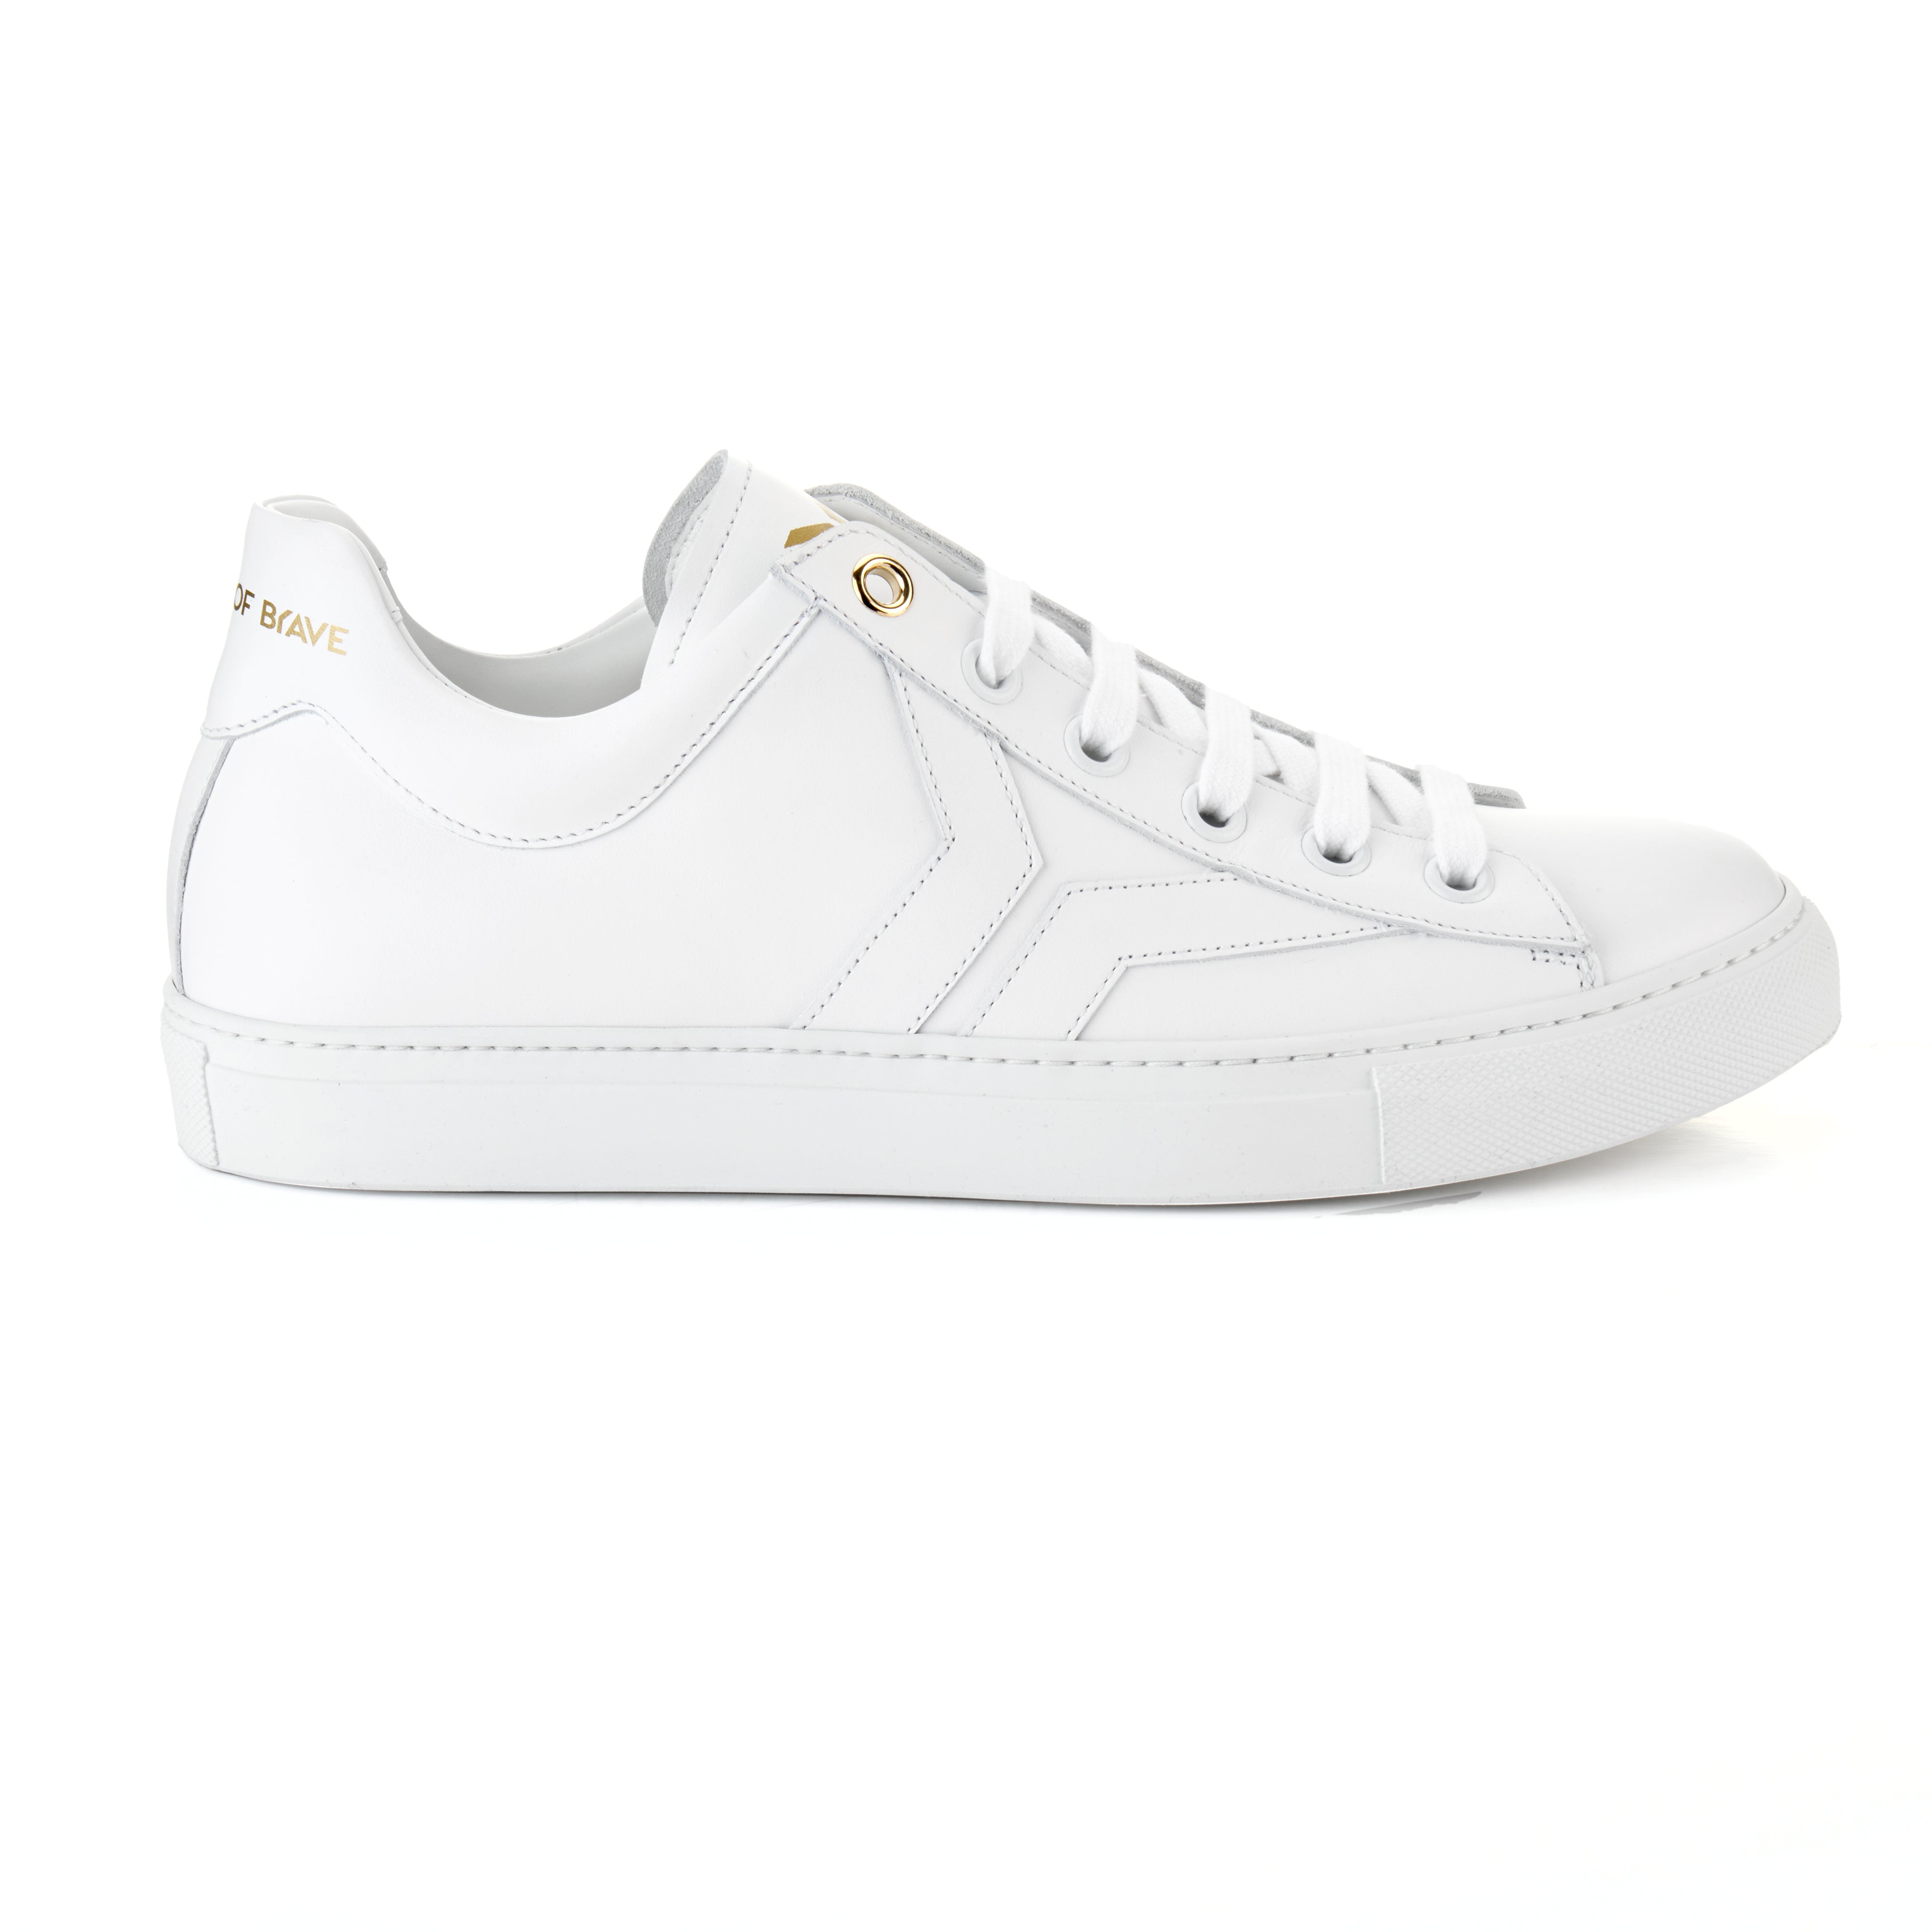 Courage Mens Low Cut White Leather Sneaker| Culture of Brave 46 / White / Low